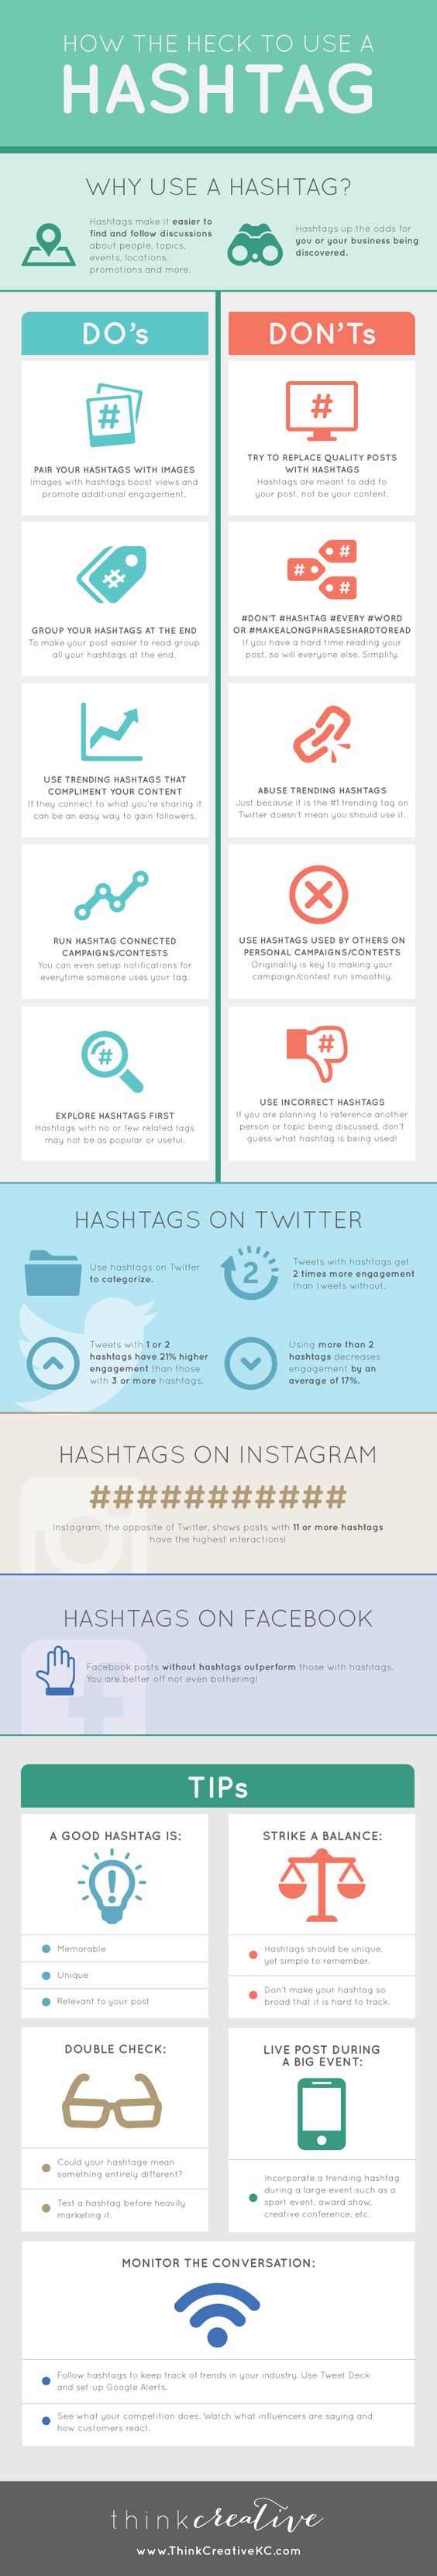 When and how to use hashtags to grow your brand and connect with your community